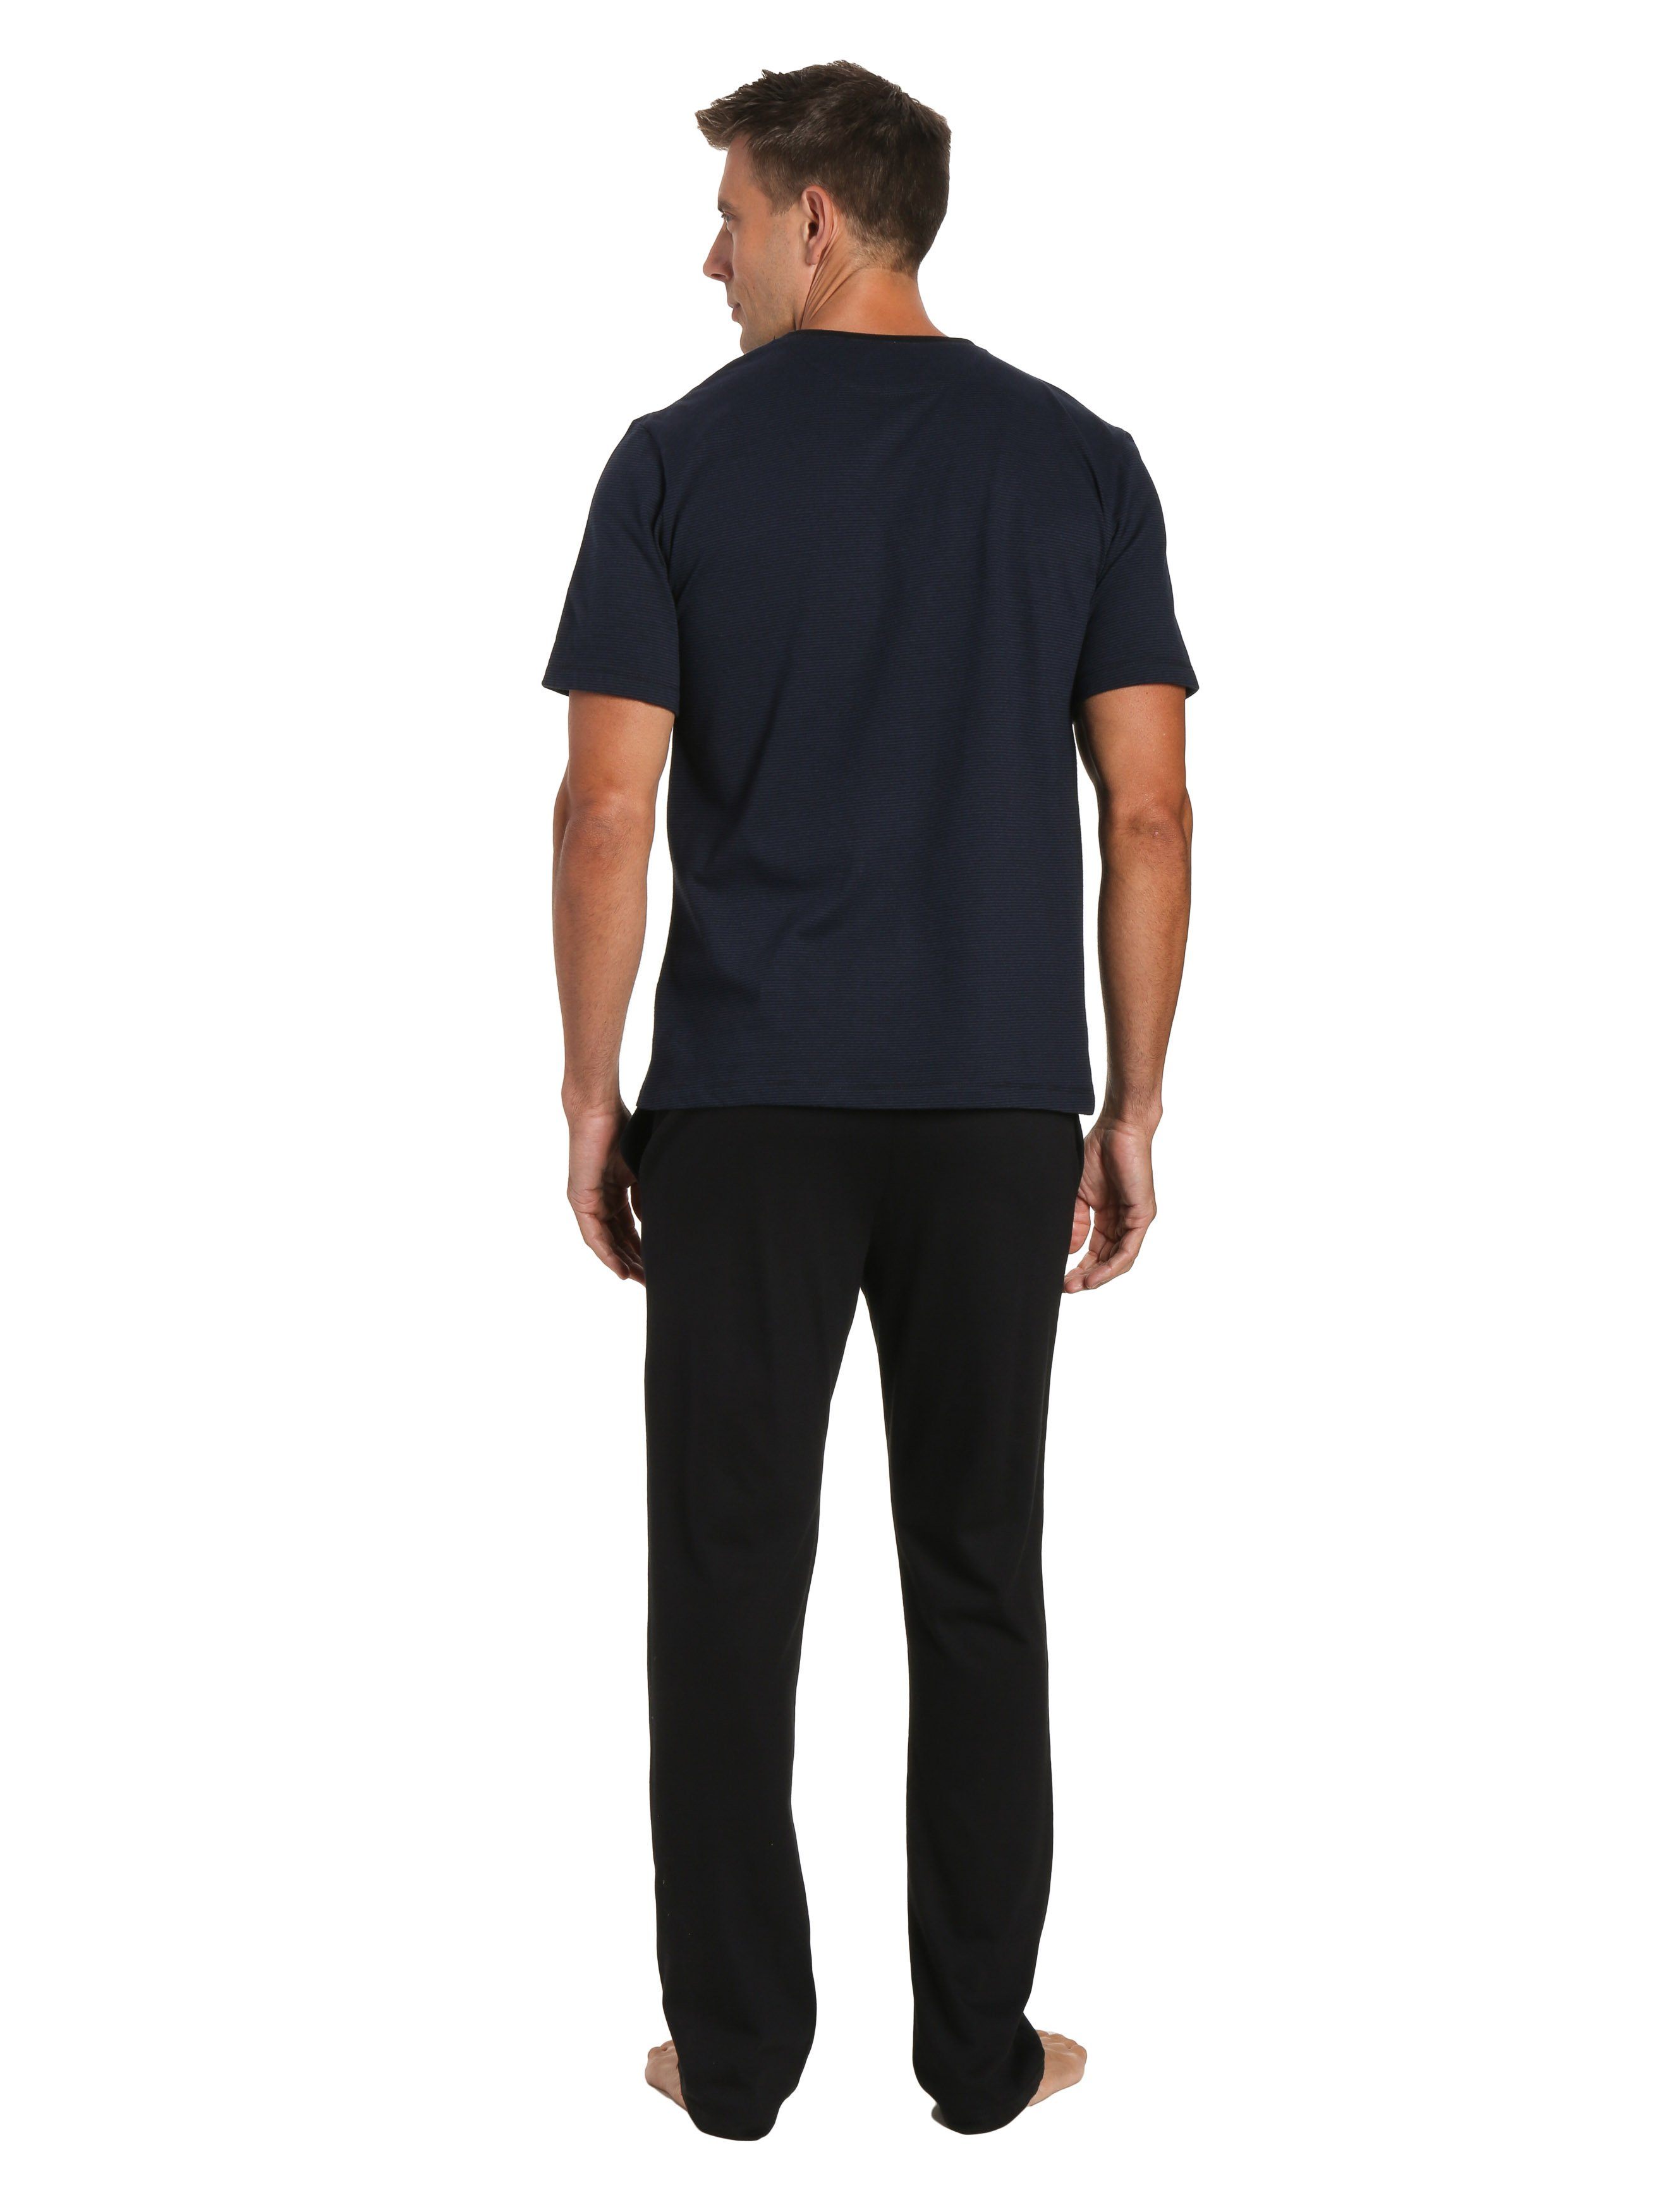 Black Pant with Stripe Navy Top